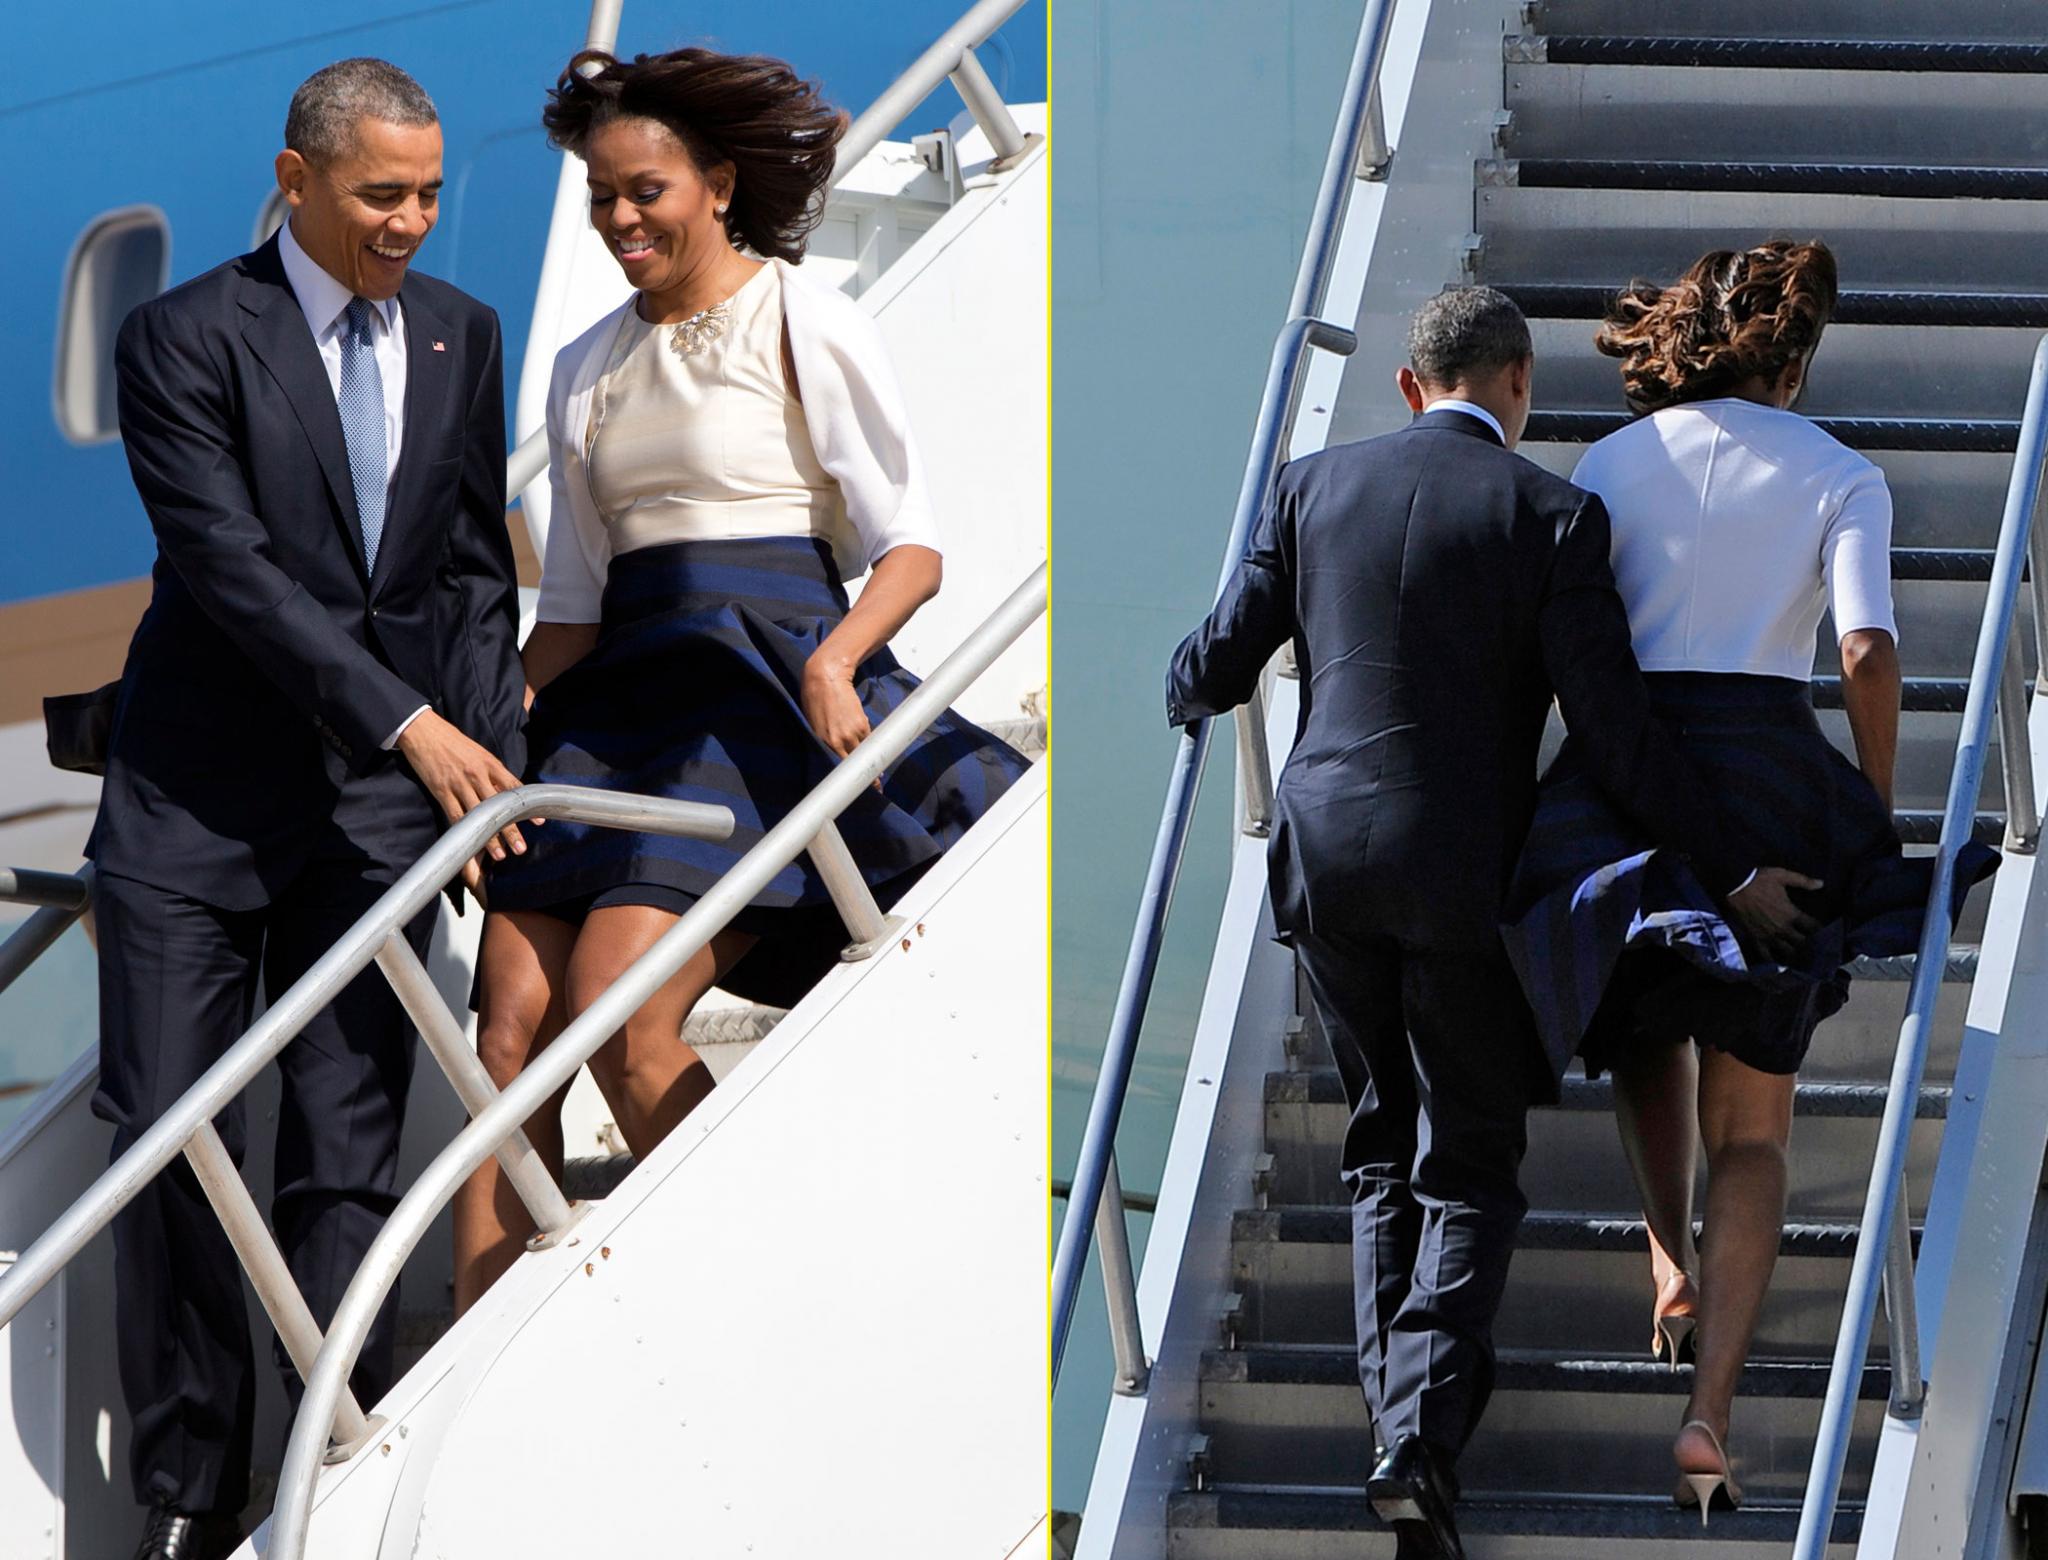 What a Gentleman! President Obama Saves First Lady from Windy Wardrobe Malfunction